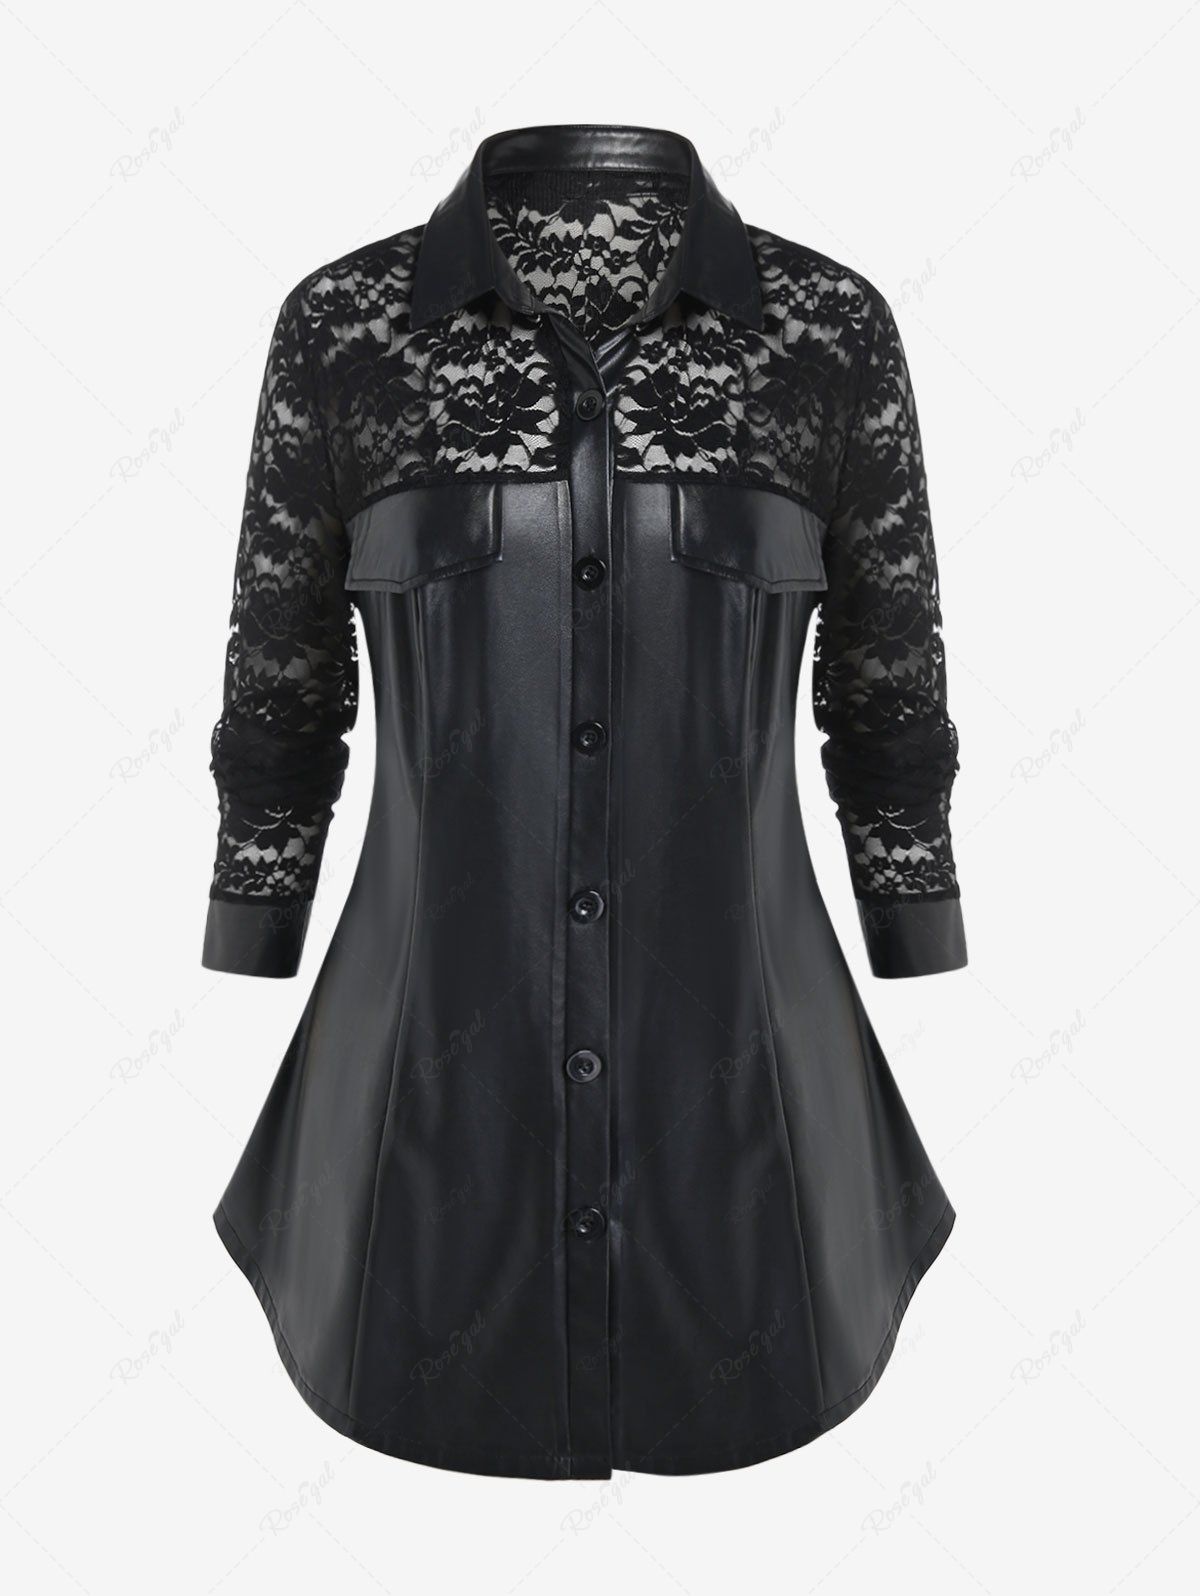 Unique Gothic Long Sleeves Faux Leather Shirt with Lace  